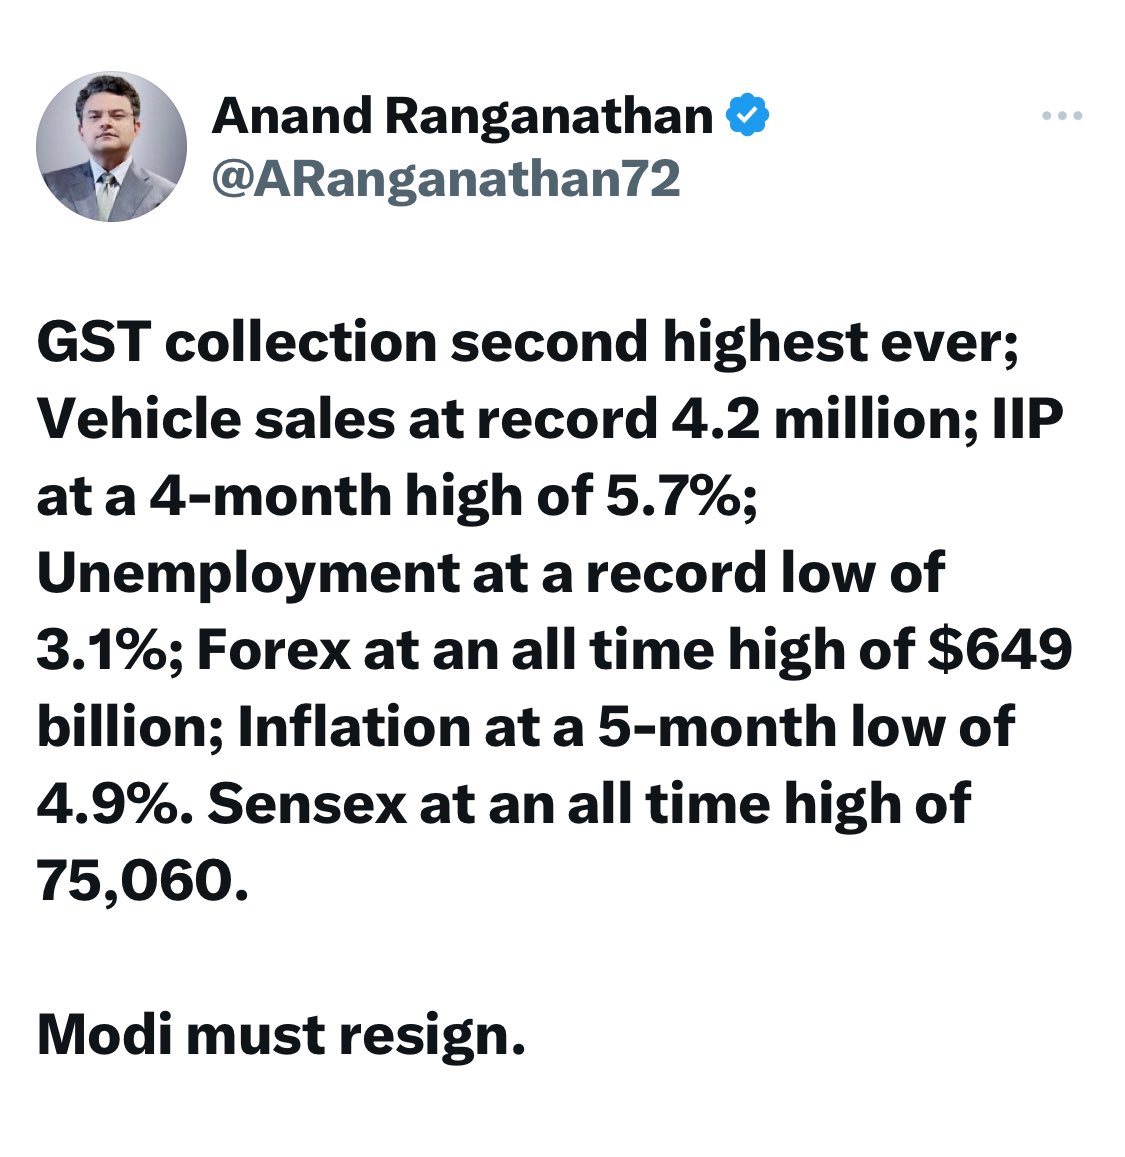 @JhaSanjay @TVMohandasPai Sir
It requires courage to be @JhaSanjay 
Inspite knowing facts and figures shown by @ARanganathan72 , he is supporting Pappu Congress and opposing good things happening for Bharat. 
Get Well Soon Sanjay Jha !